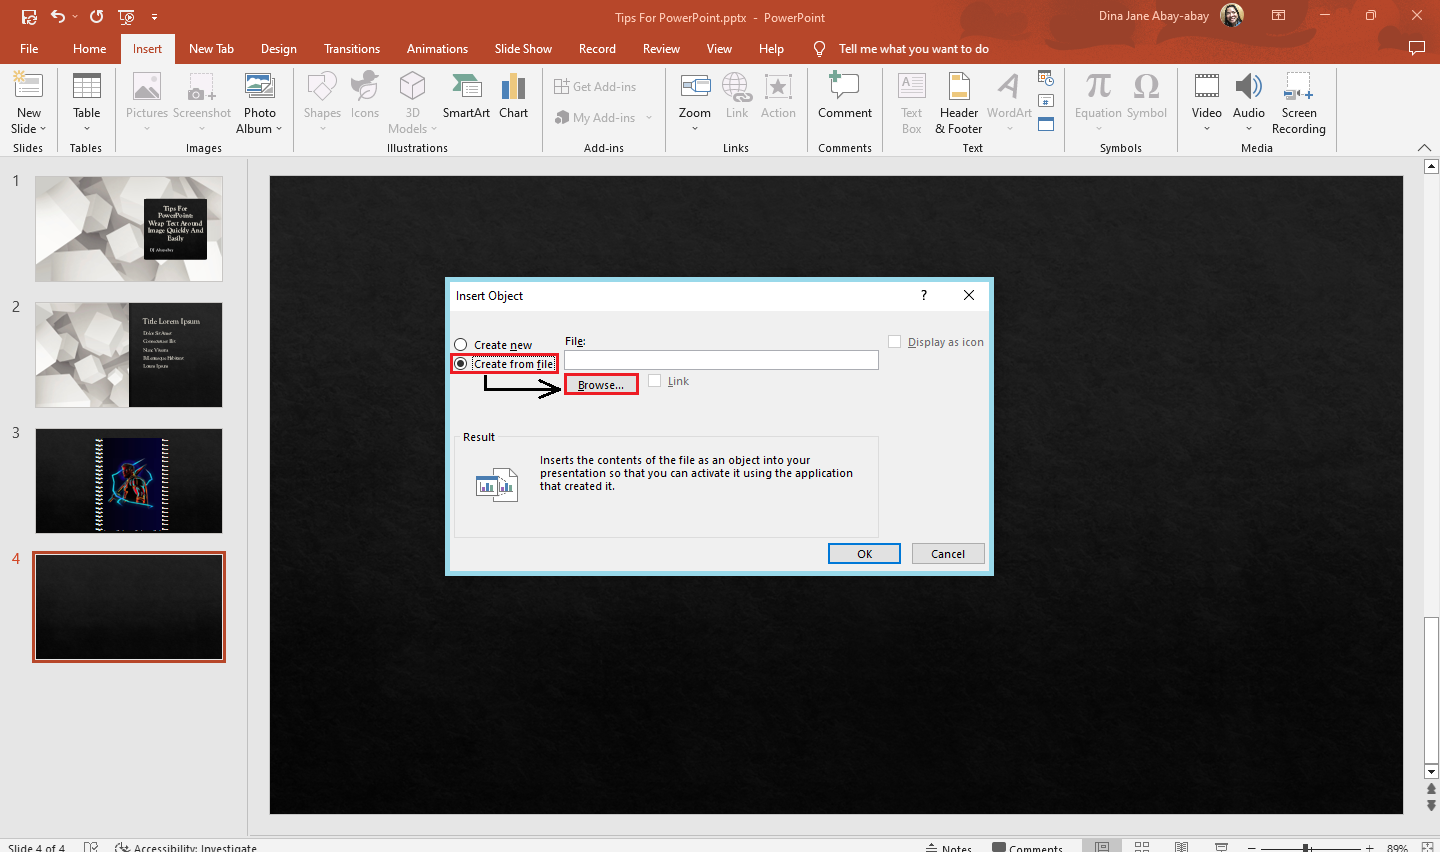 When the "Insert Object" dialog box appears, click "Create from file and select "Browse."